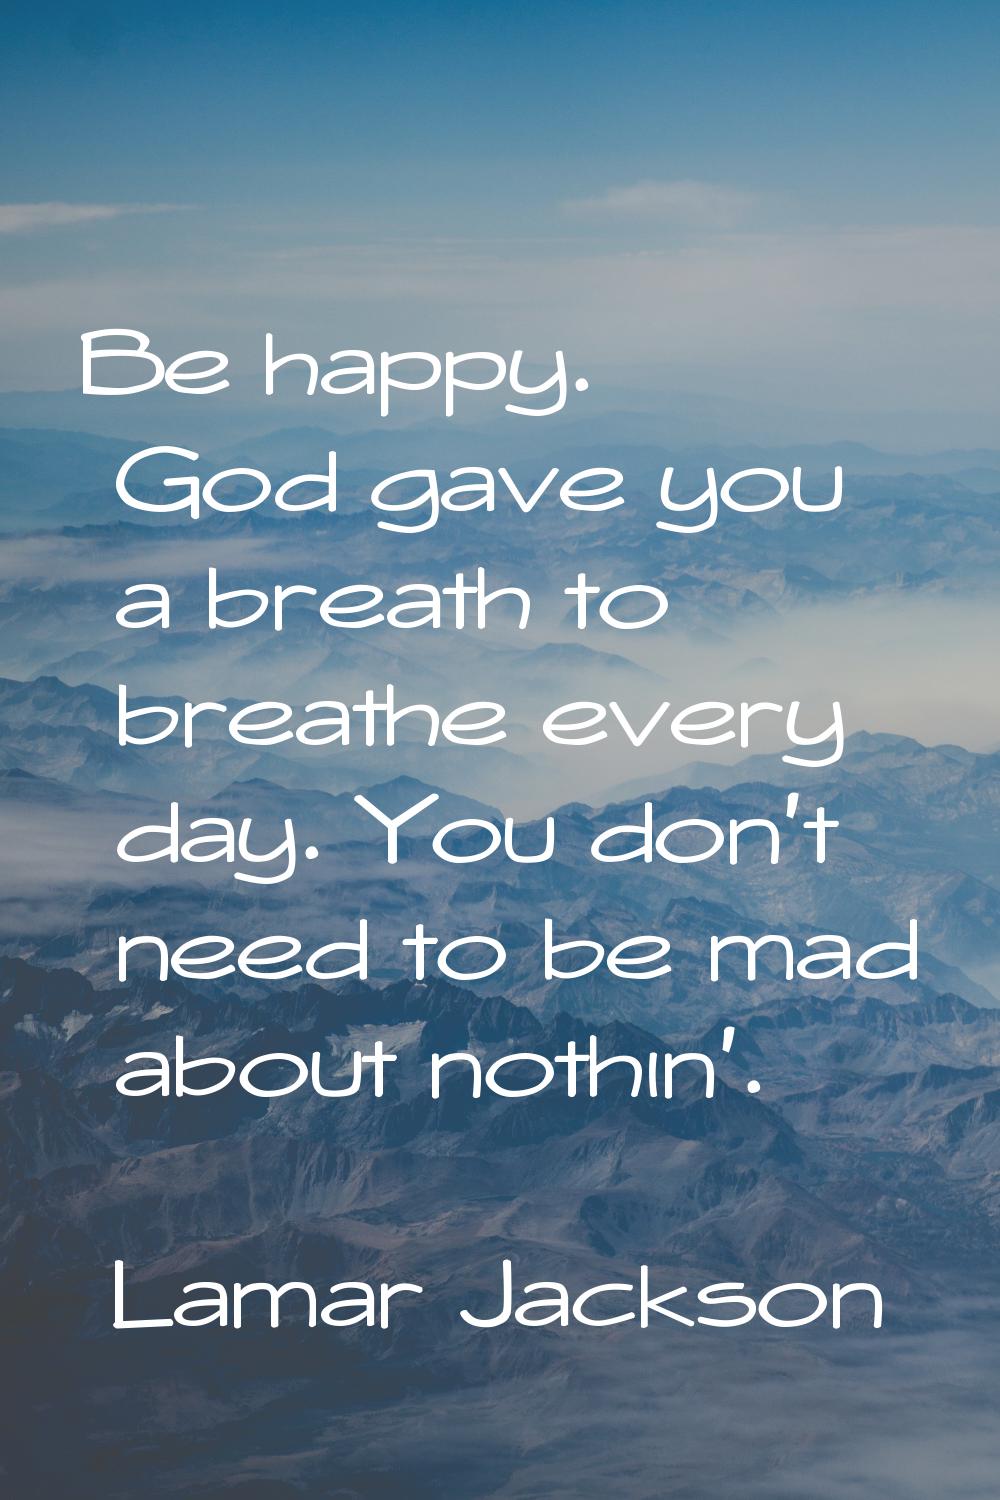 Be happy. God gave you a breath to breathe every day. You don't need to be mad about nothin'.